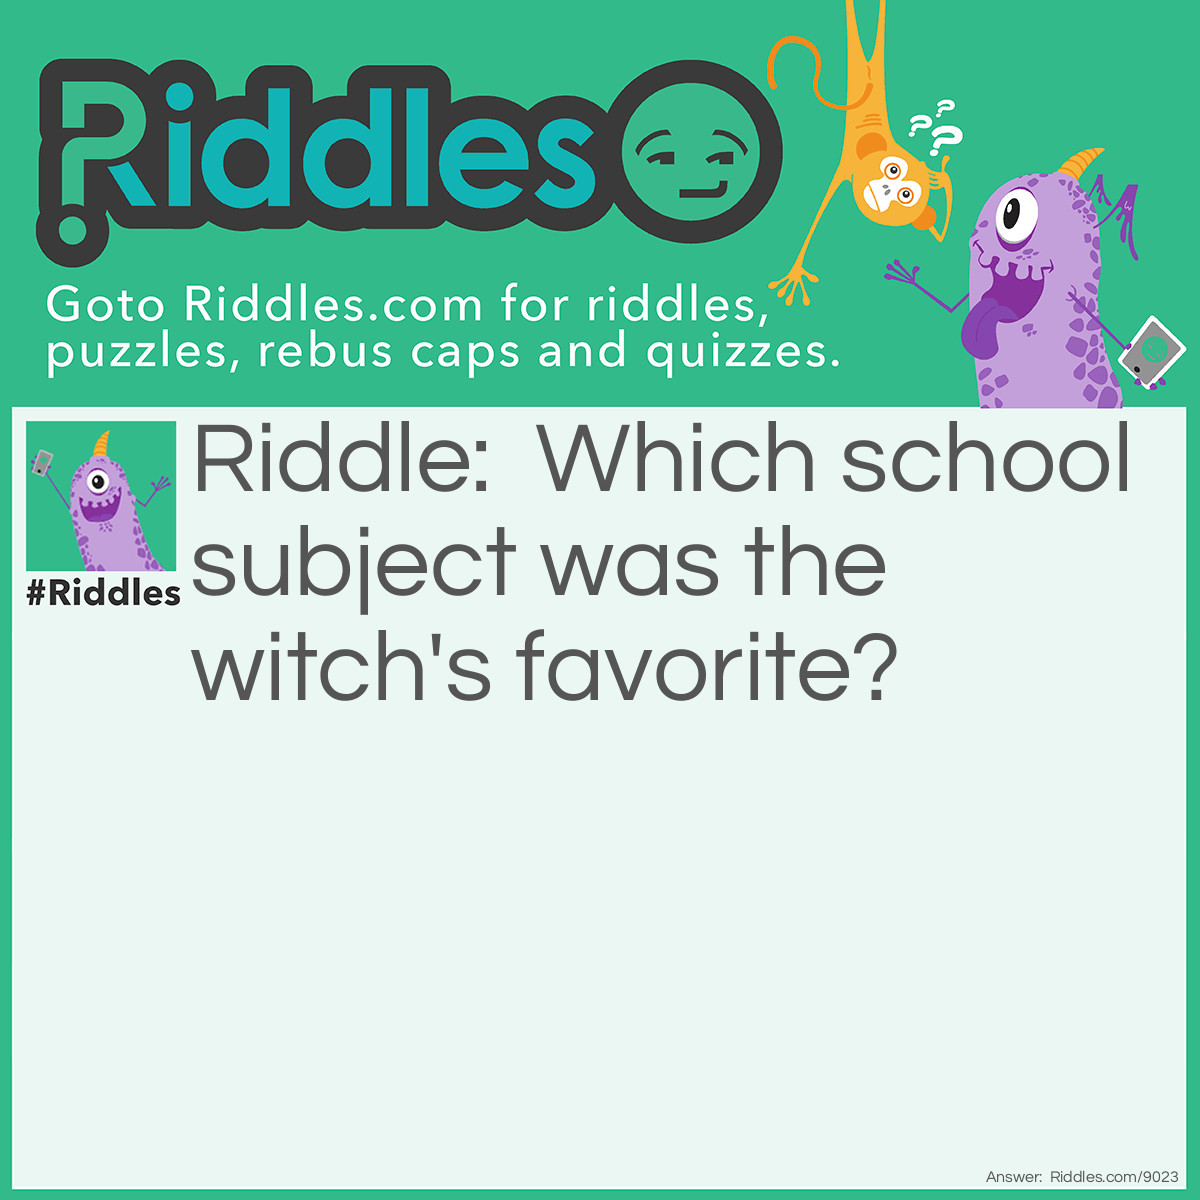 Riddle: Which school subject was the witch's favorite? Answer: Spelling!